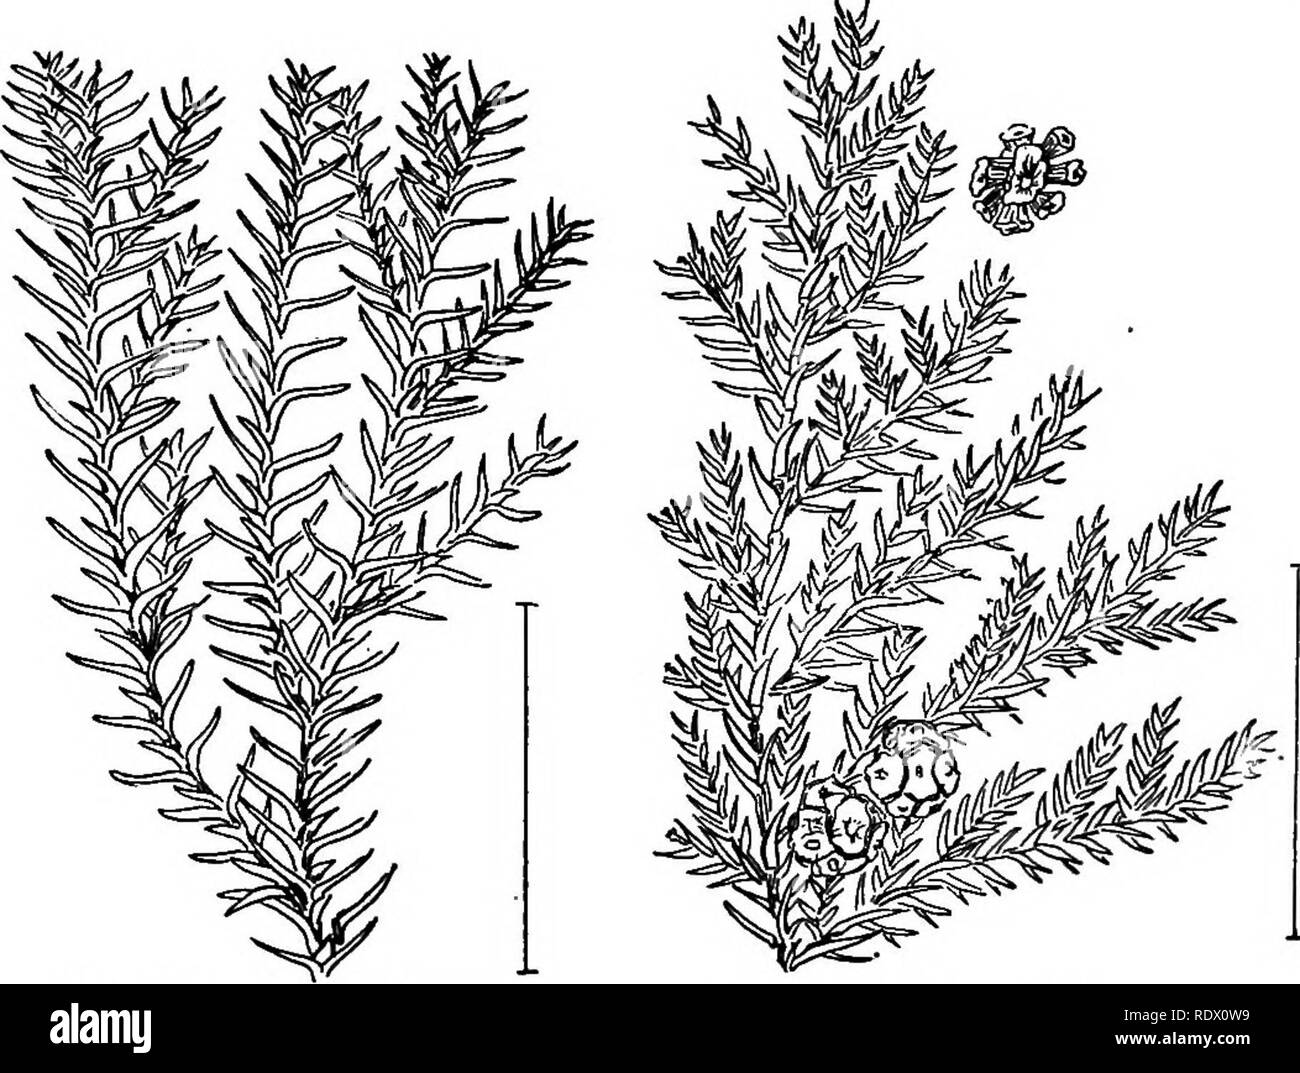 . Ornamental shrubs of the United States (hardy, cultivated). Shrubs. 328 DESCRIPTIONS OF THE SHRUBS an arrangement that is called 2-ranked. The cones are short, under 1 inch, pendulous with smooth scales, found at the tips of the branches. Of the Common Hemlock—Tsuga canadensis,—Sargent's Weeping Hemlock (587) — var. Sargentiana, or S&amp;rgenti pgndula — rarely grows over 3 feet high and has short drooping branchlets forming a dense flat-topped' mass of foliage; Dwarf Hemlock^^ nana—is a dwarf with spreading branches and short branchlets forming a depressed shrub under 3 feet high. There is  Stock Photo